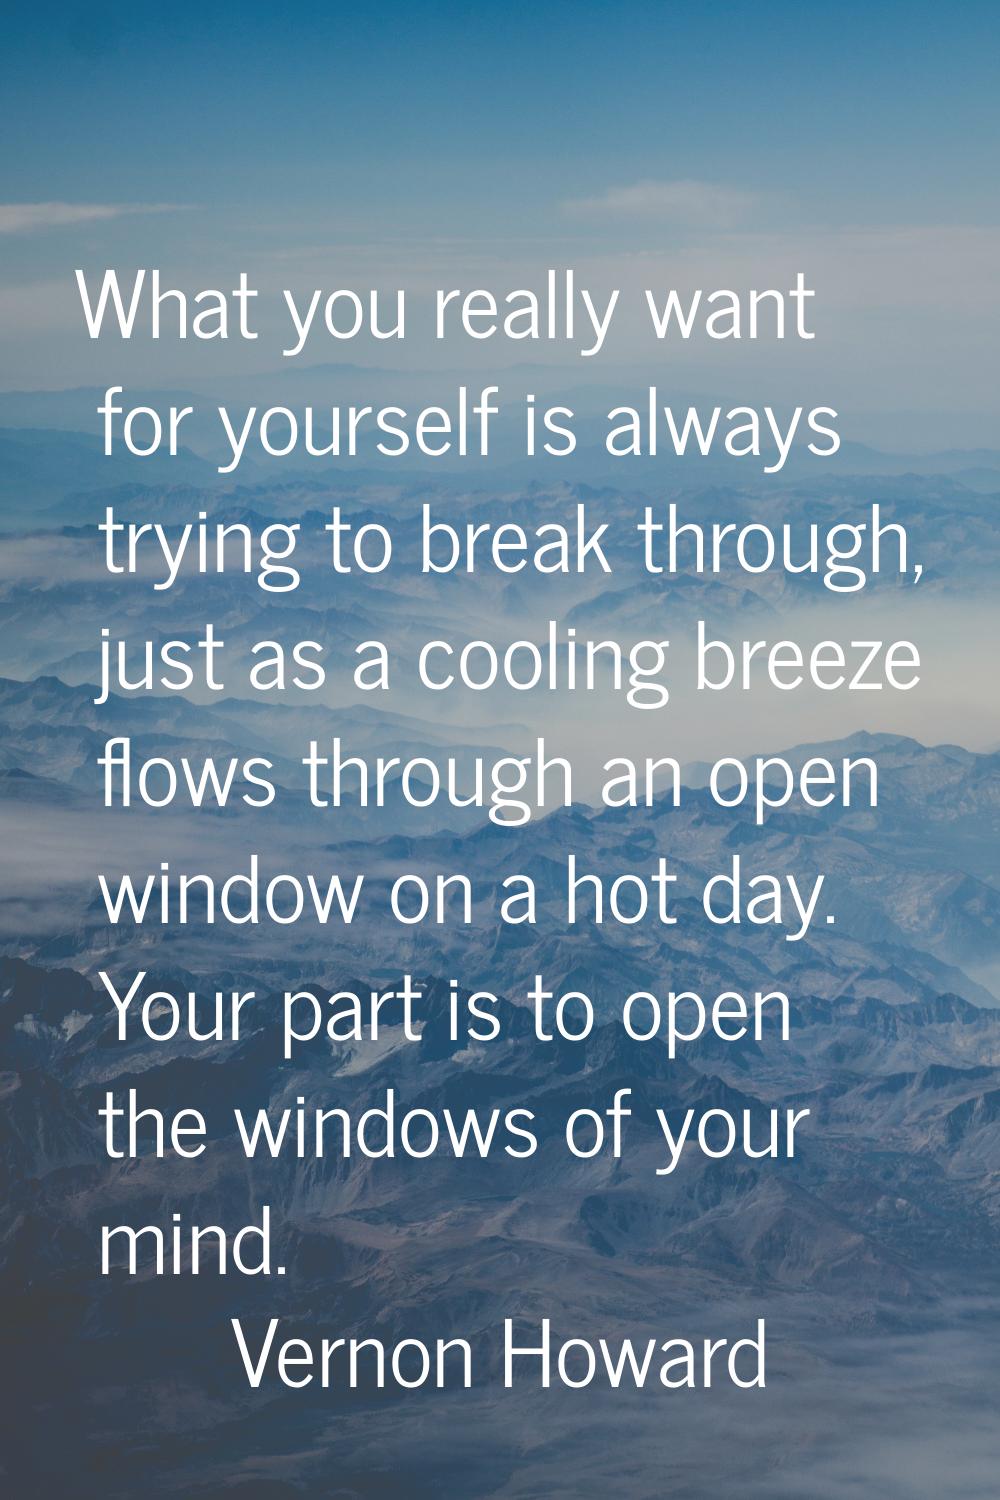 What you really want for yourself is always trying to break through, just as a cooling breeze flows